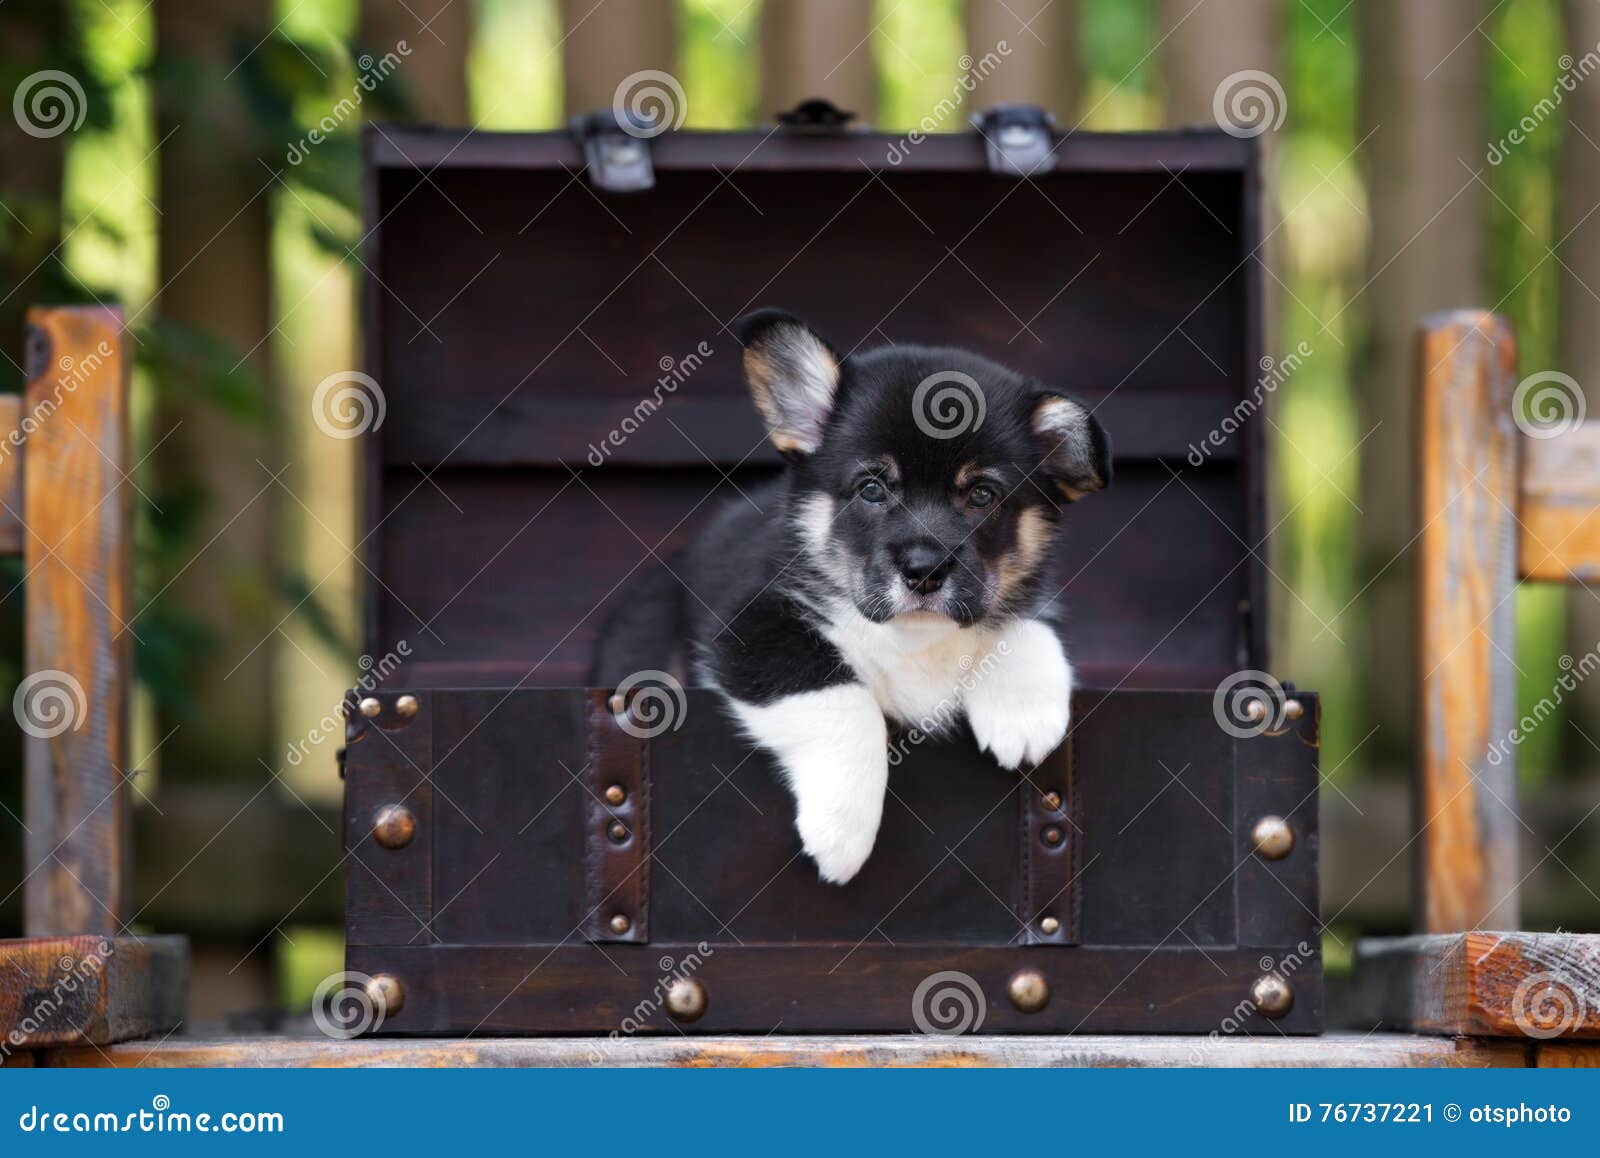 Adorable Welsh Corgi Puppy in a Box Stock Image - Image of domestic ...